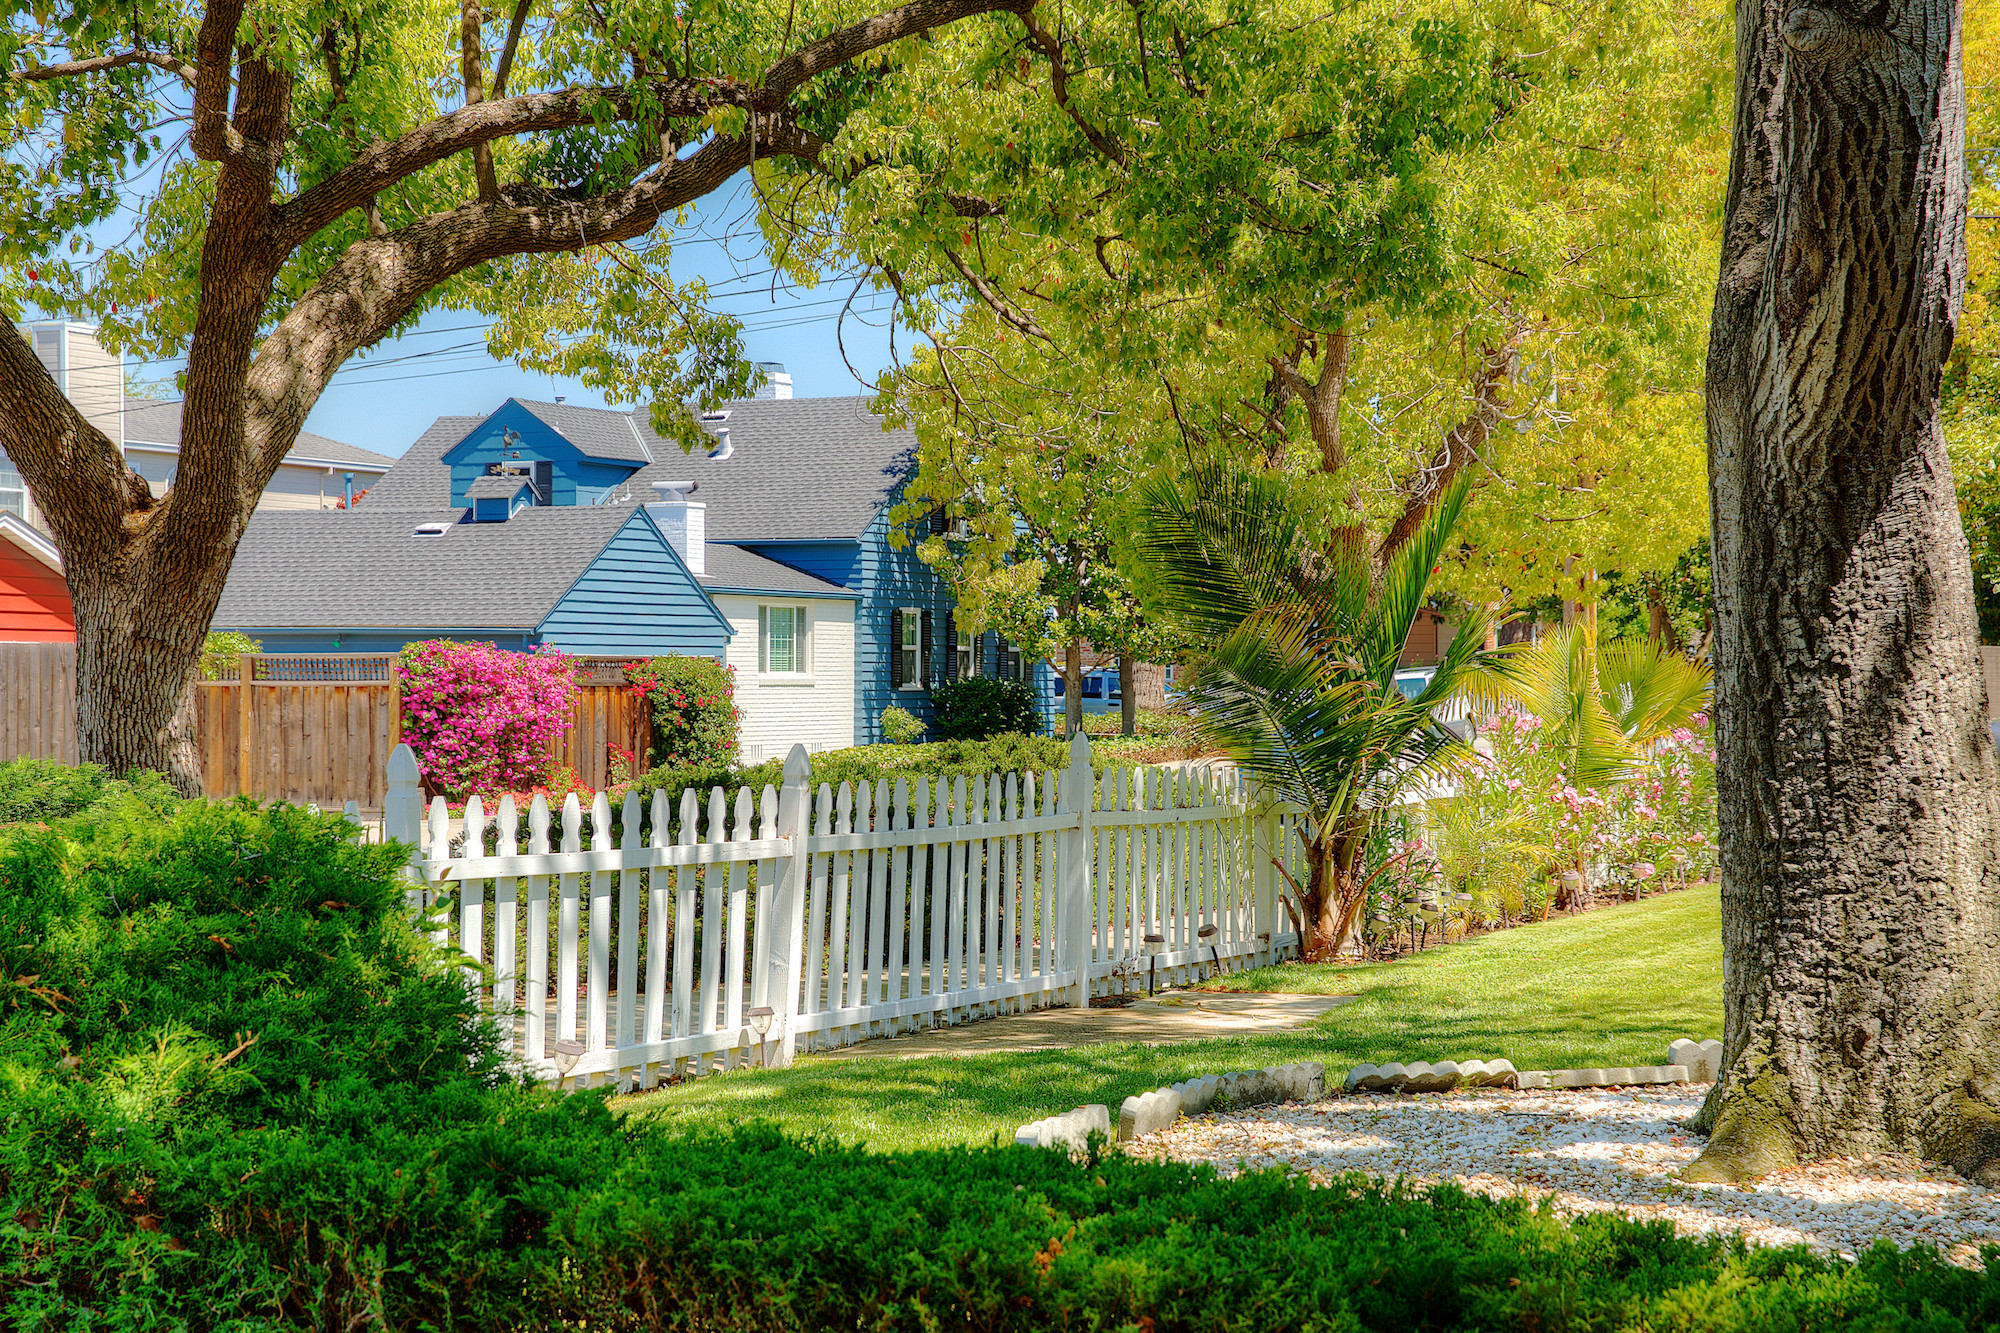 Home with picket fence in Howard Park, San Carlos